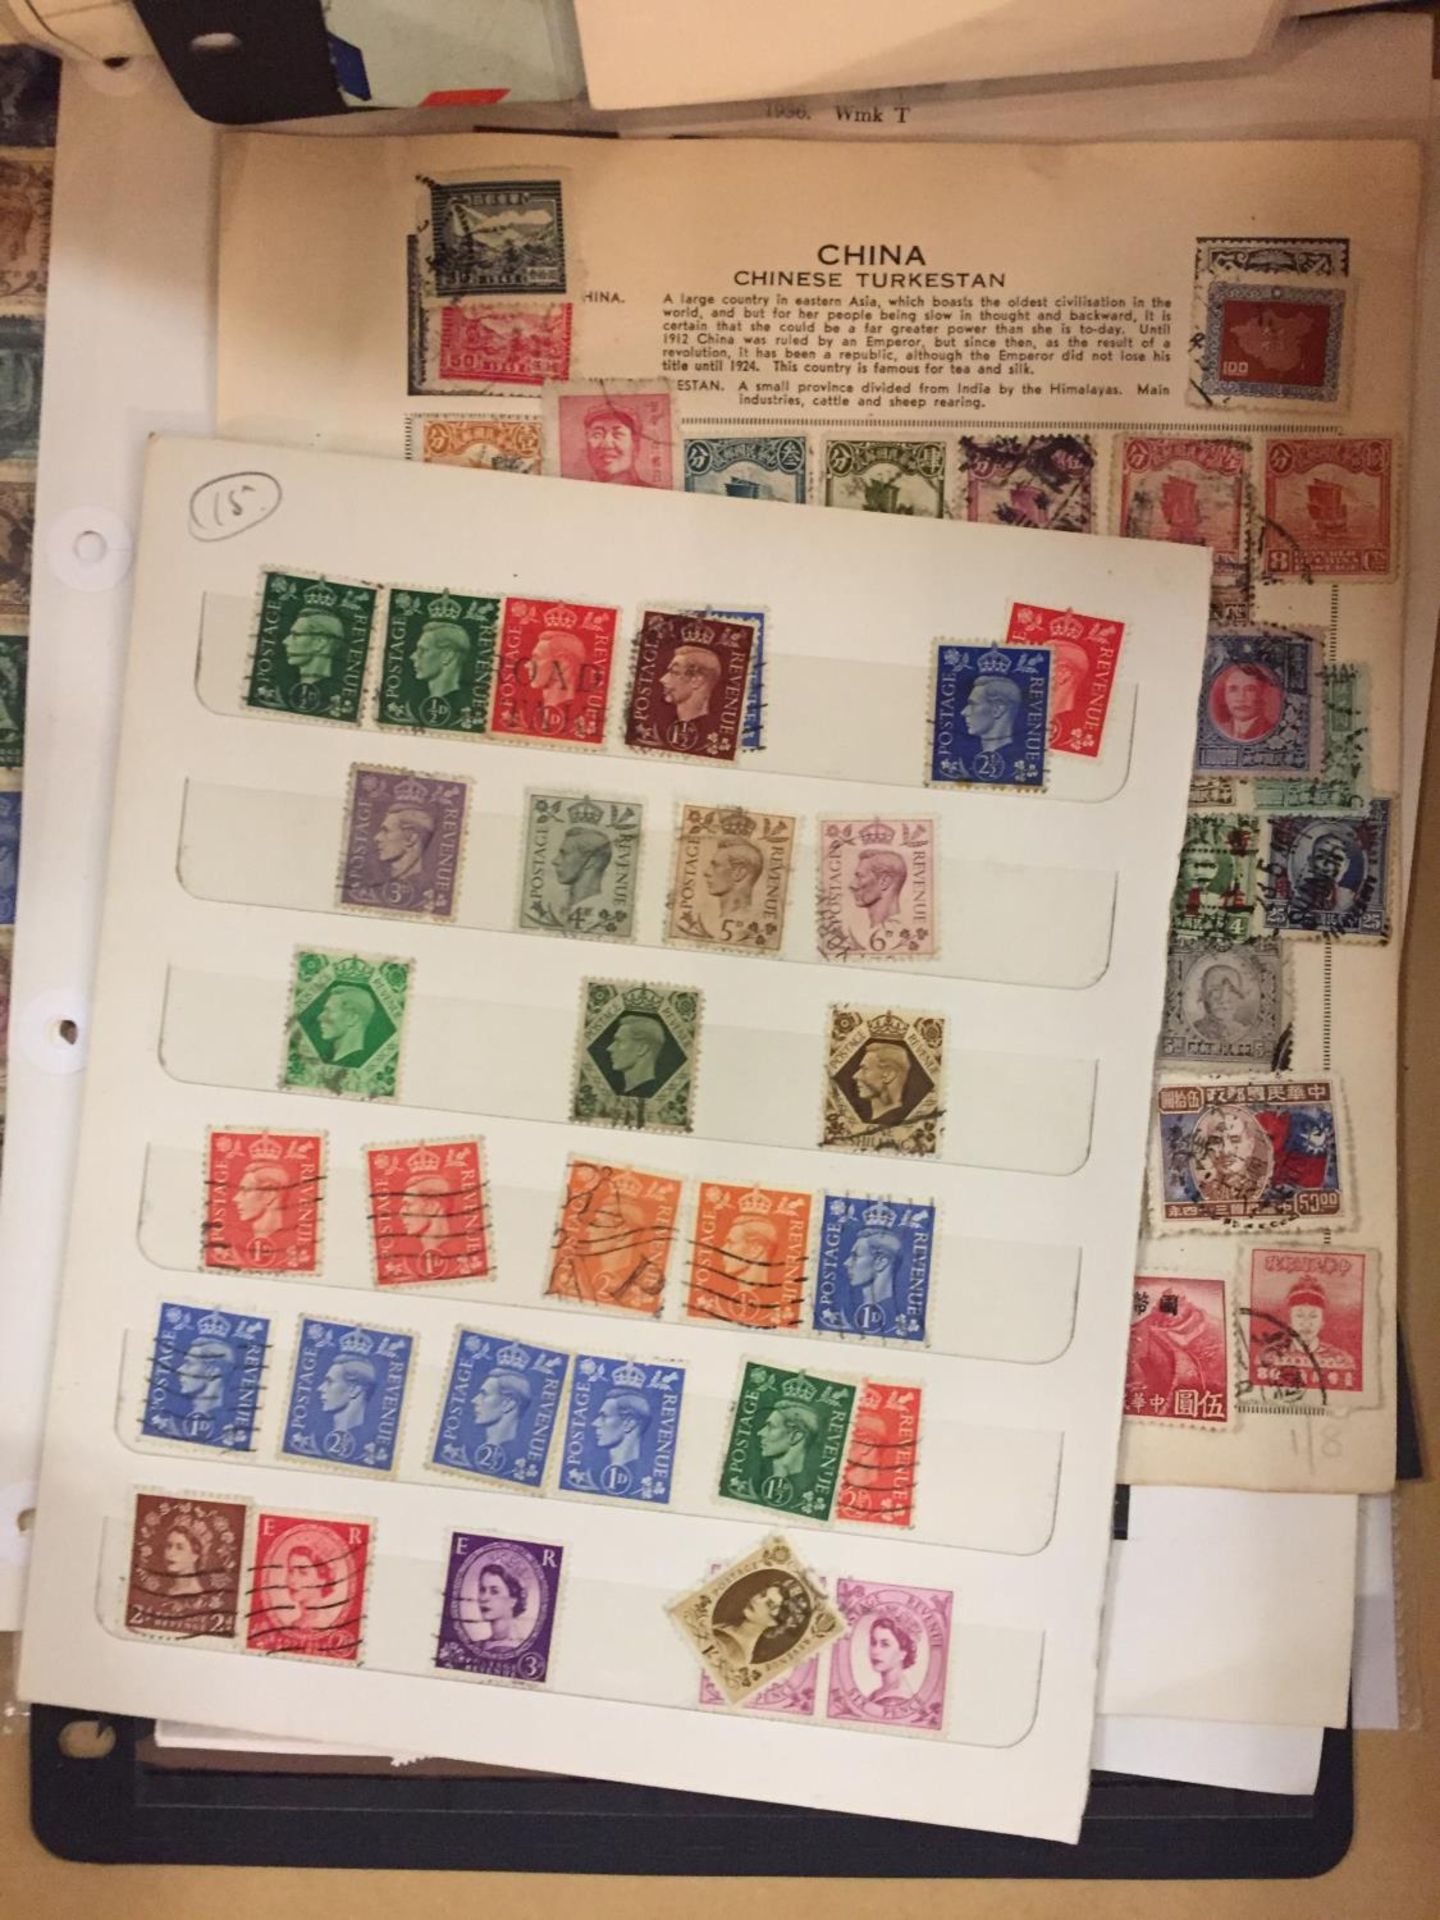 A COLLECTION OF VARIOUS STAMPS, CIGARETTE CARDS AND GERMAN BANK NOTES - Image 5 of 6